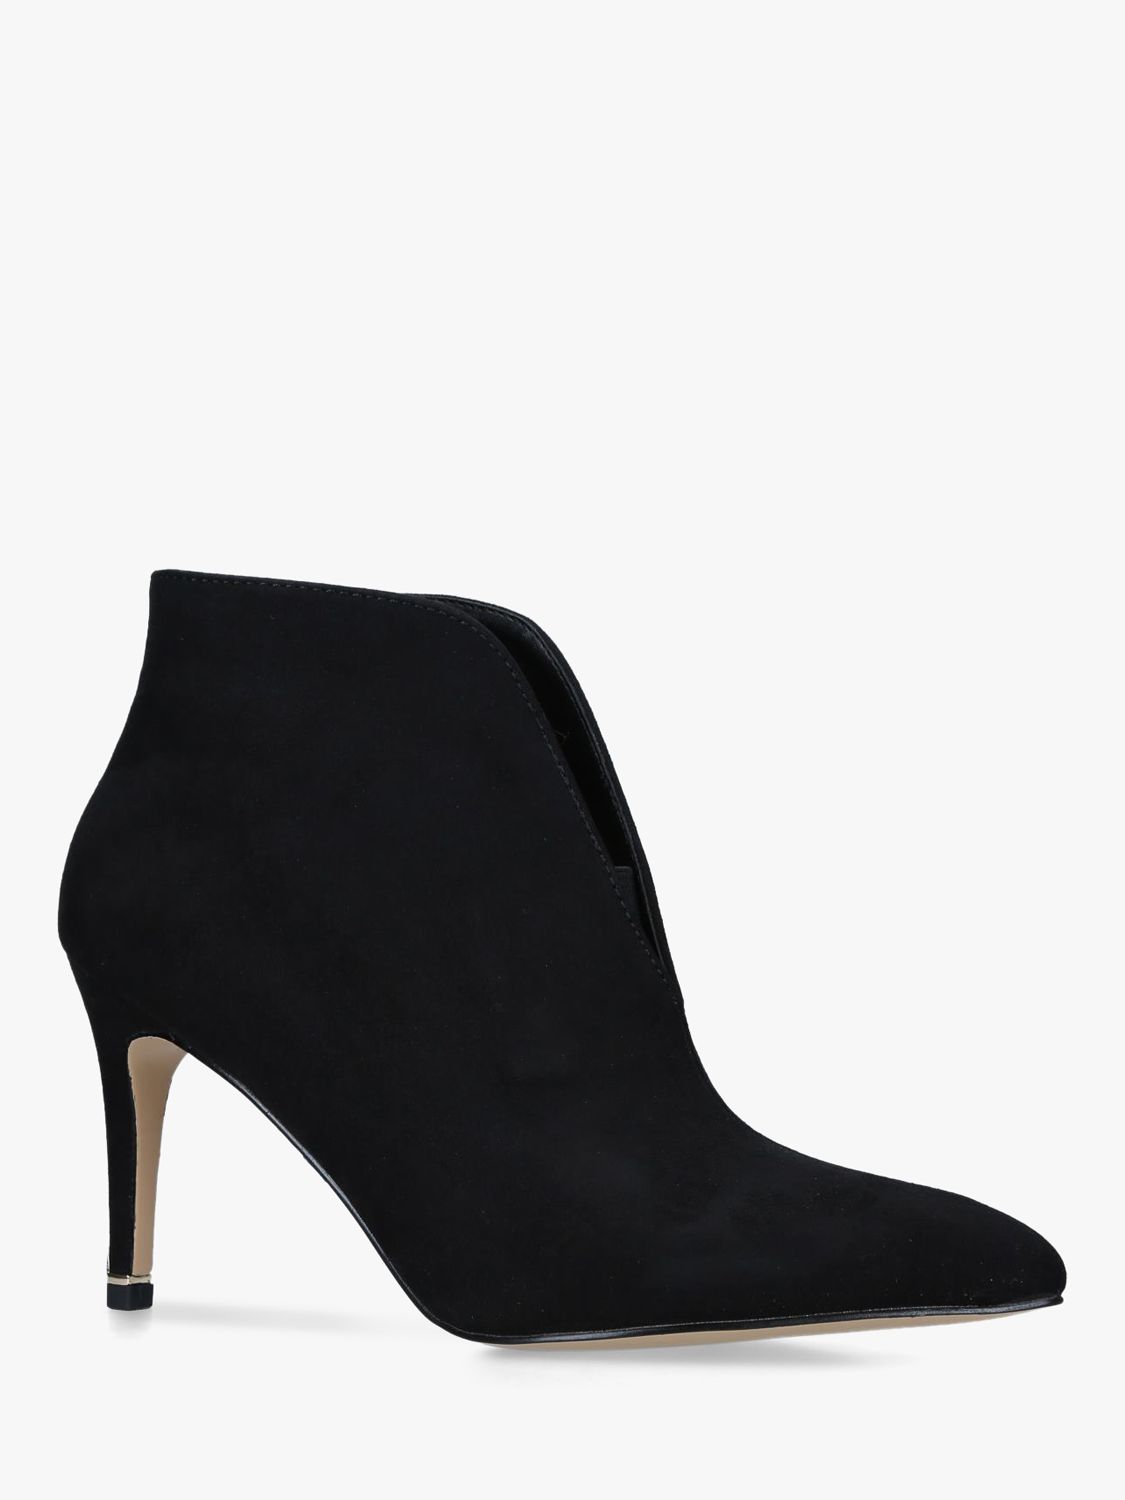 Carvela Sure Pointed Toe Ankle Boots, Black at John Lewis & Partners